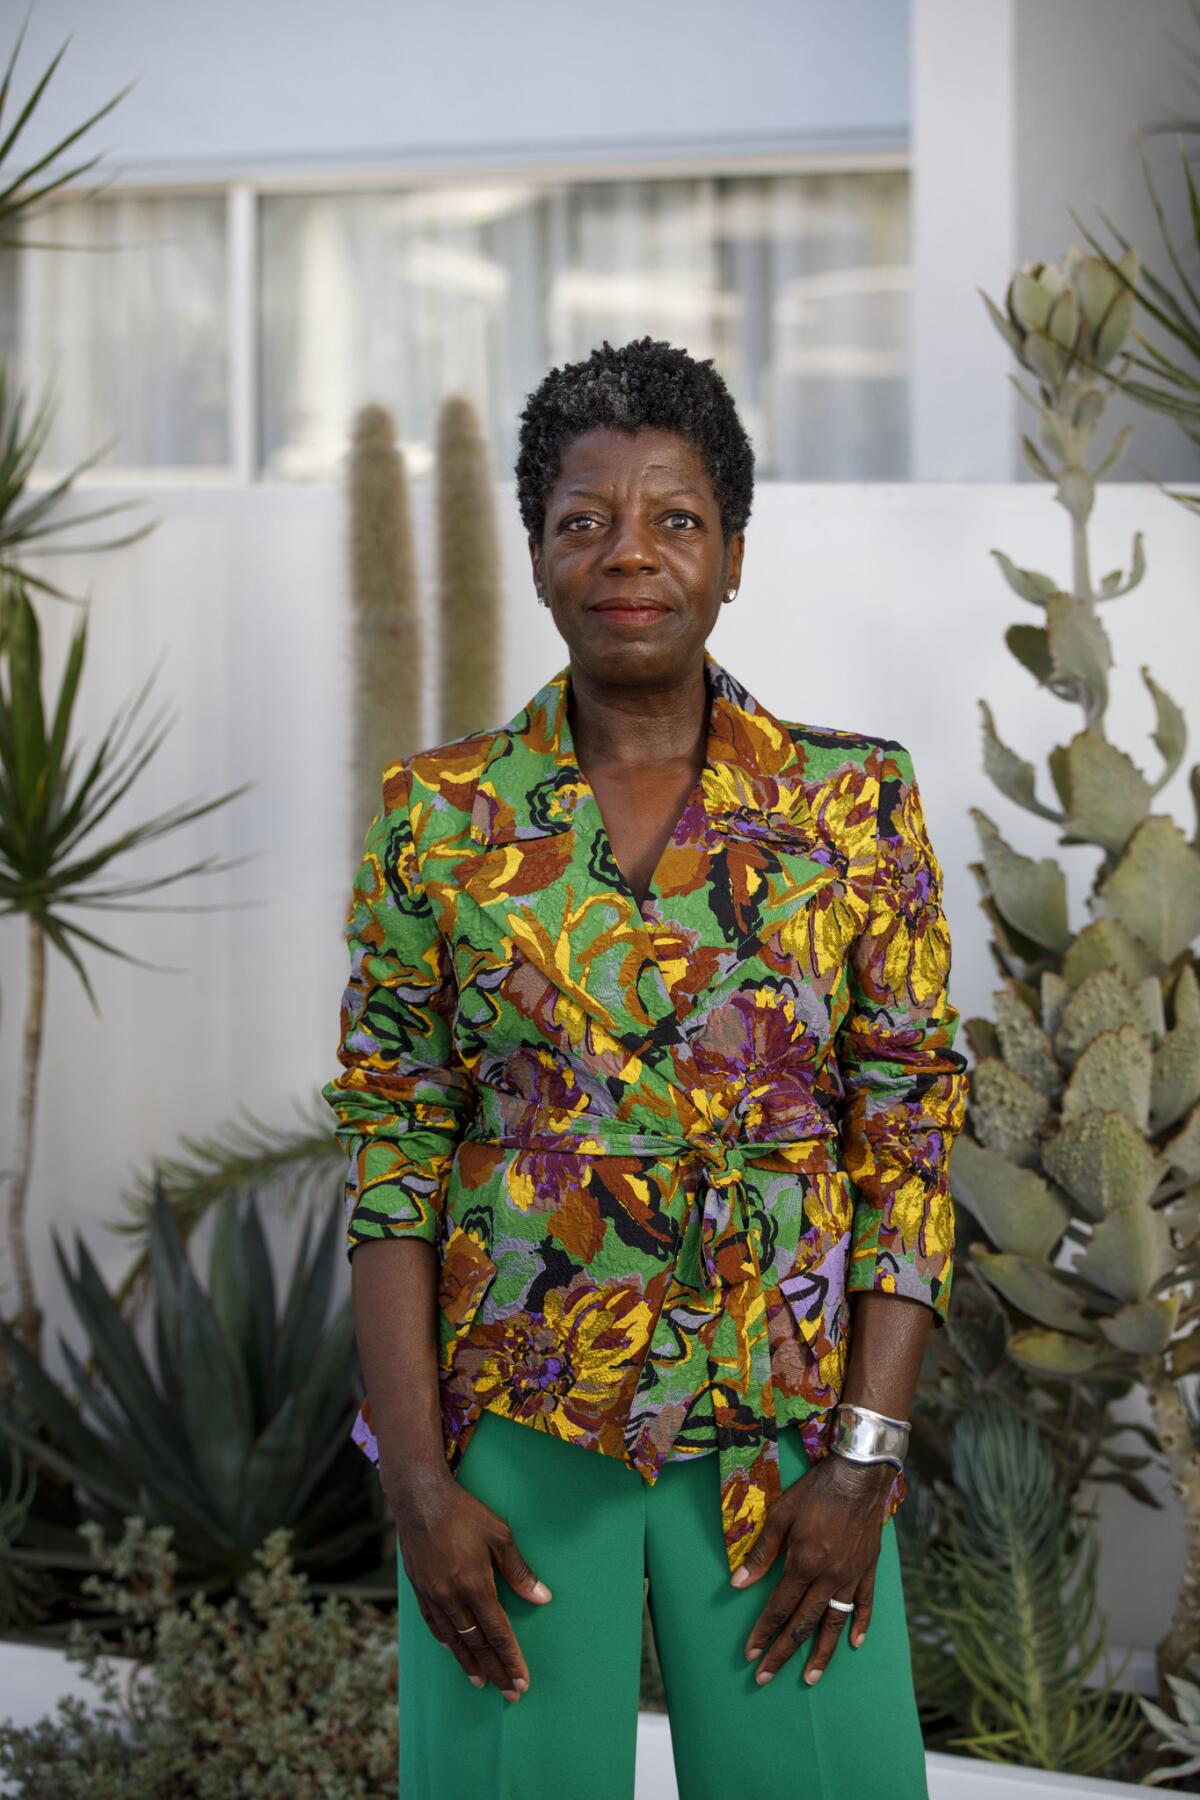 Thelma Golden has helped shaped the art world from Harlem.